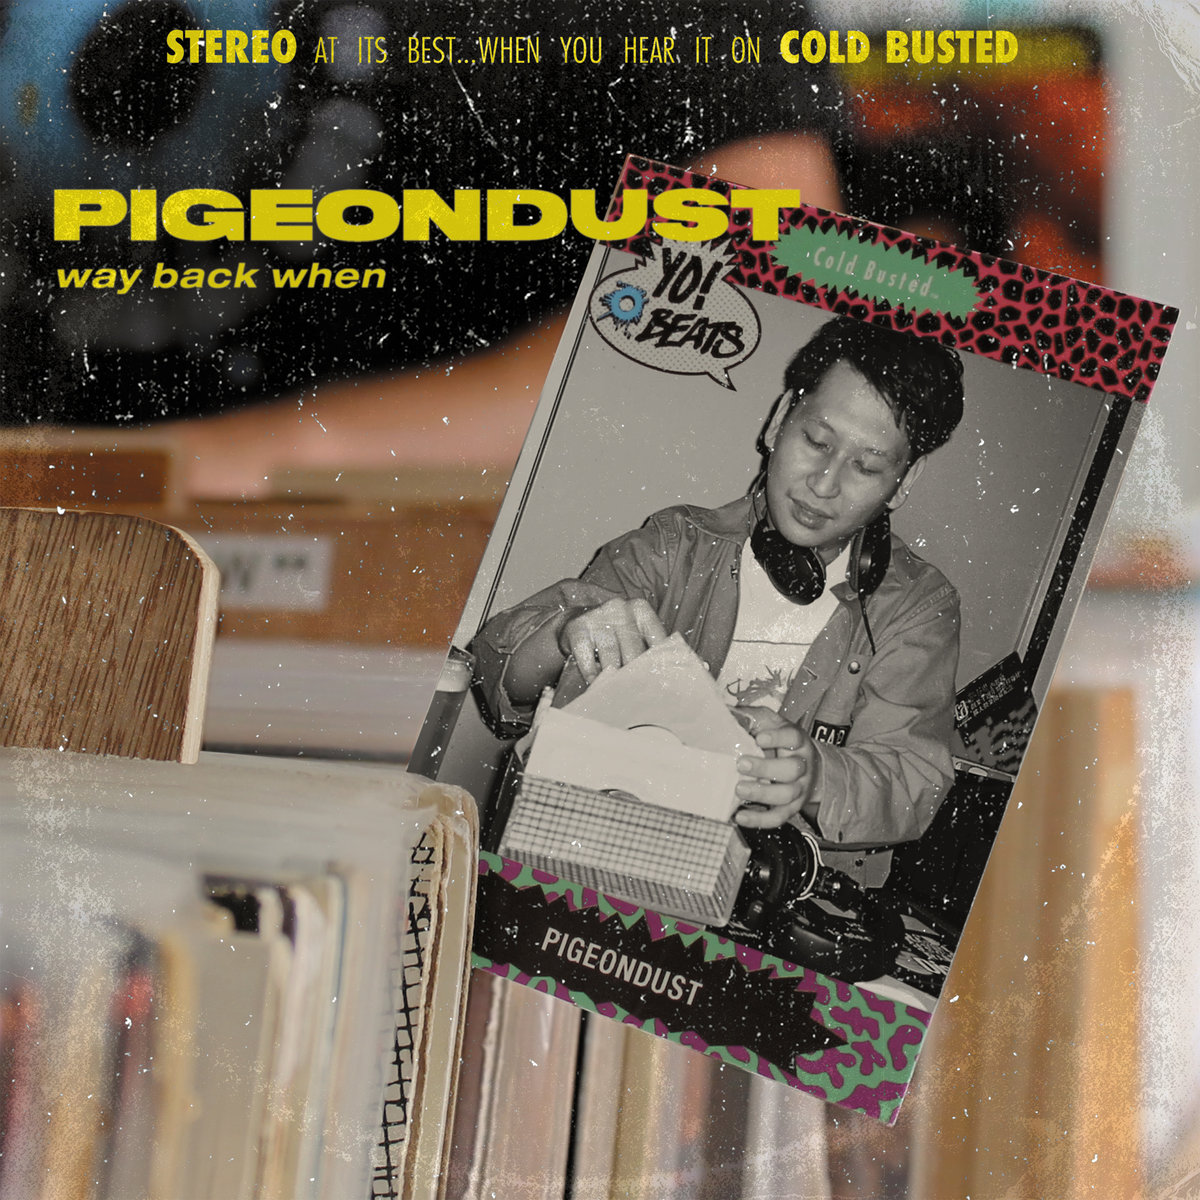 No Words #98: Pigeondust, Endangered Species, Vice Beats, Elaquent ft. Oddisee, The Audible Doctor